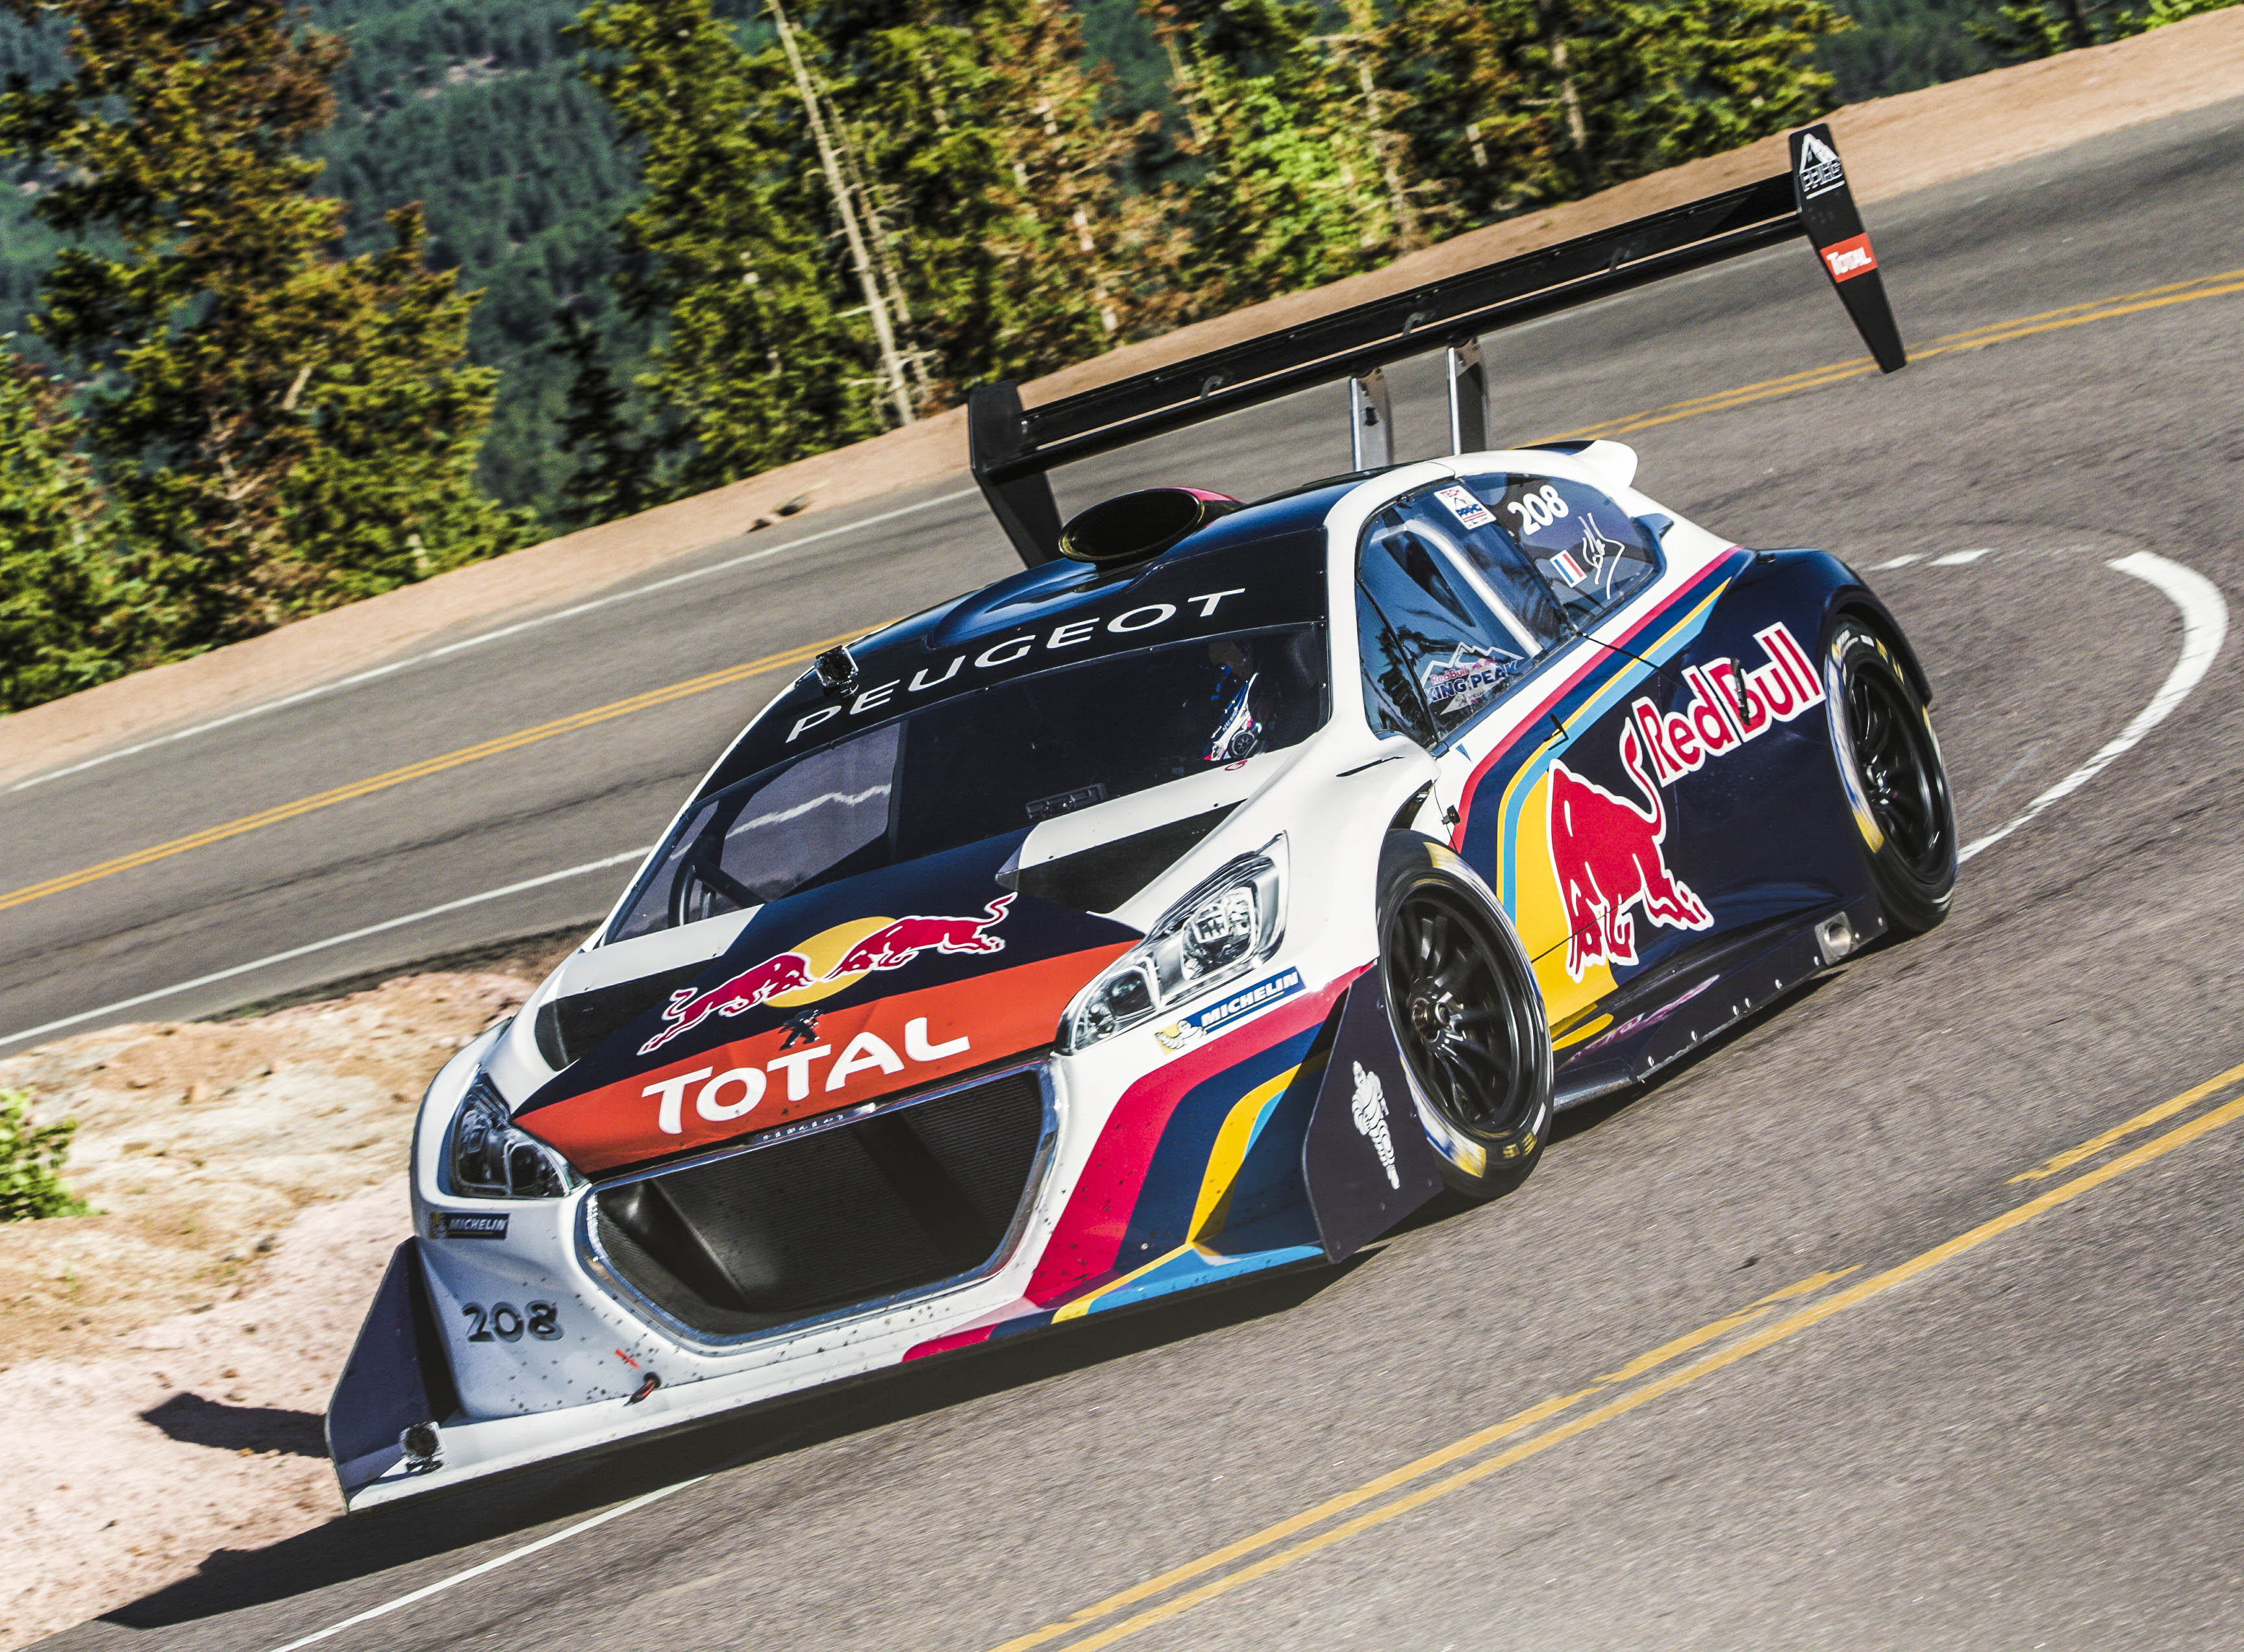 Pikes Peak Hill Climb 2013 – Will we see the sub 9 minute time reached?